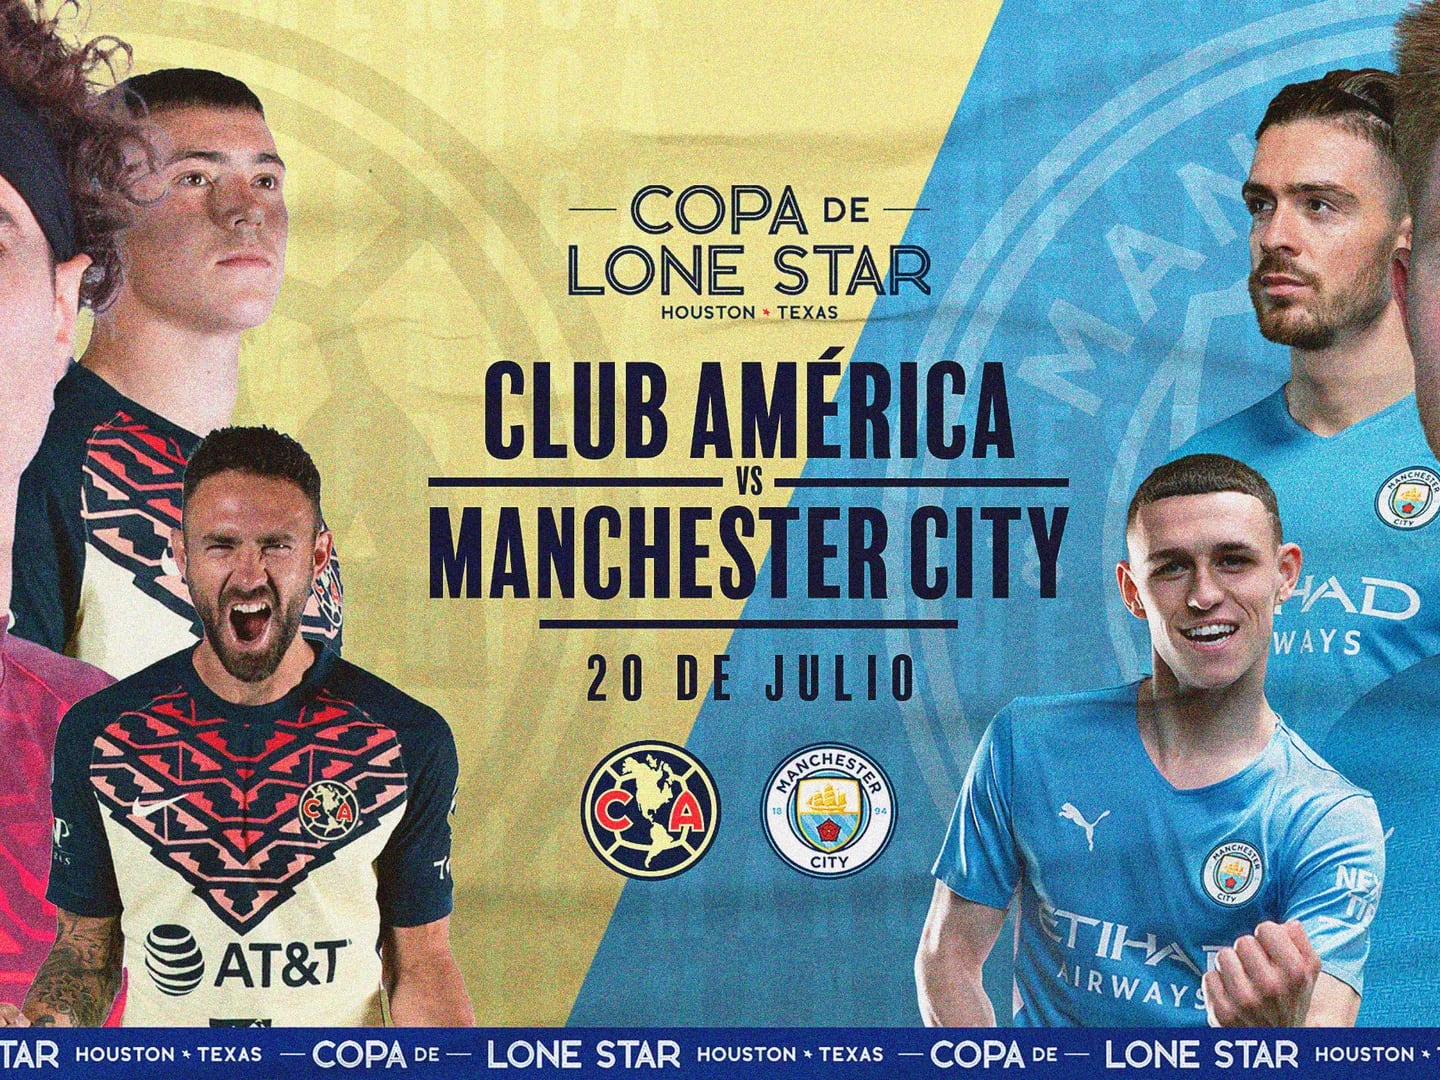 The eagles of America will face Manchester City in a duel of